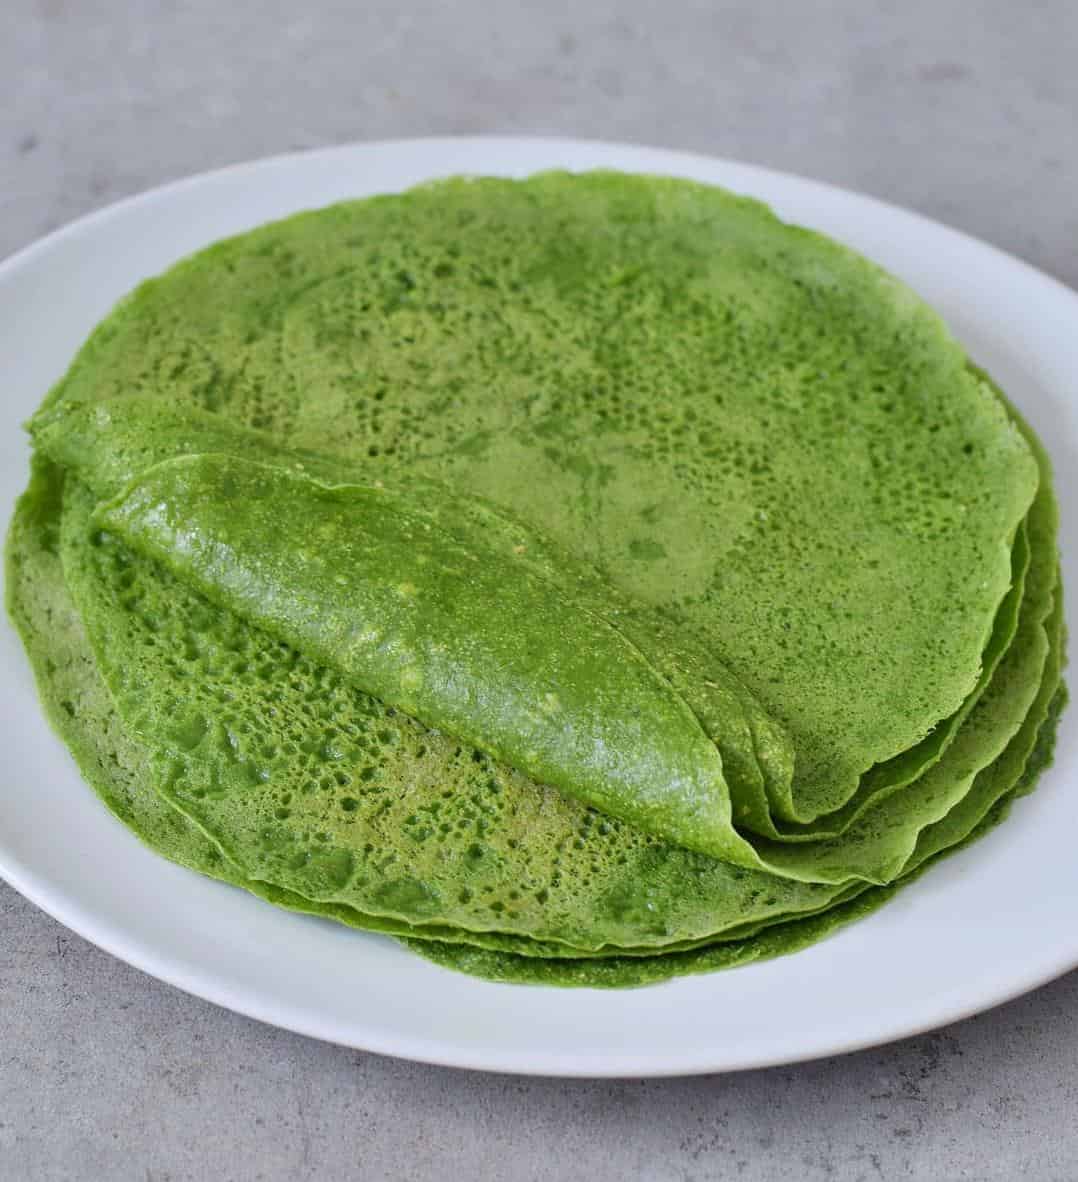  This spinach wrap is so full of flavor and protein that you'll never know it's vegan.